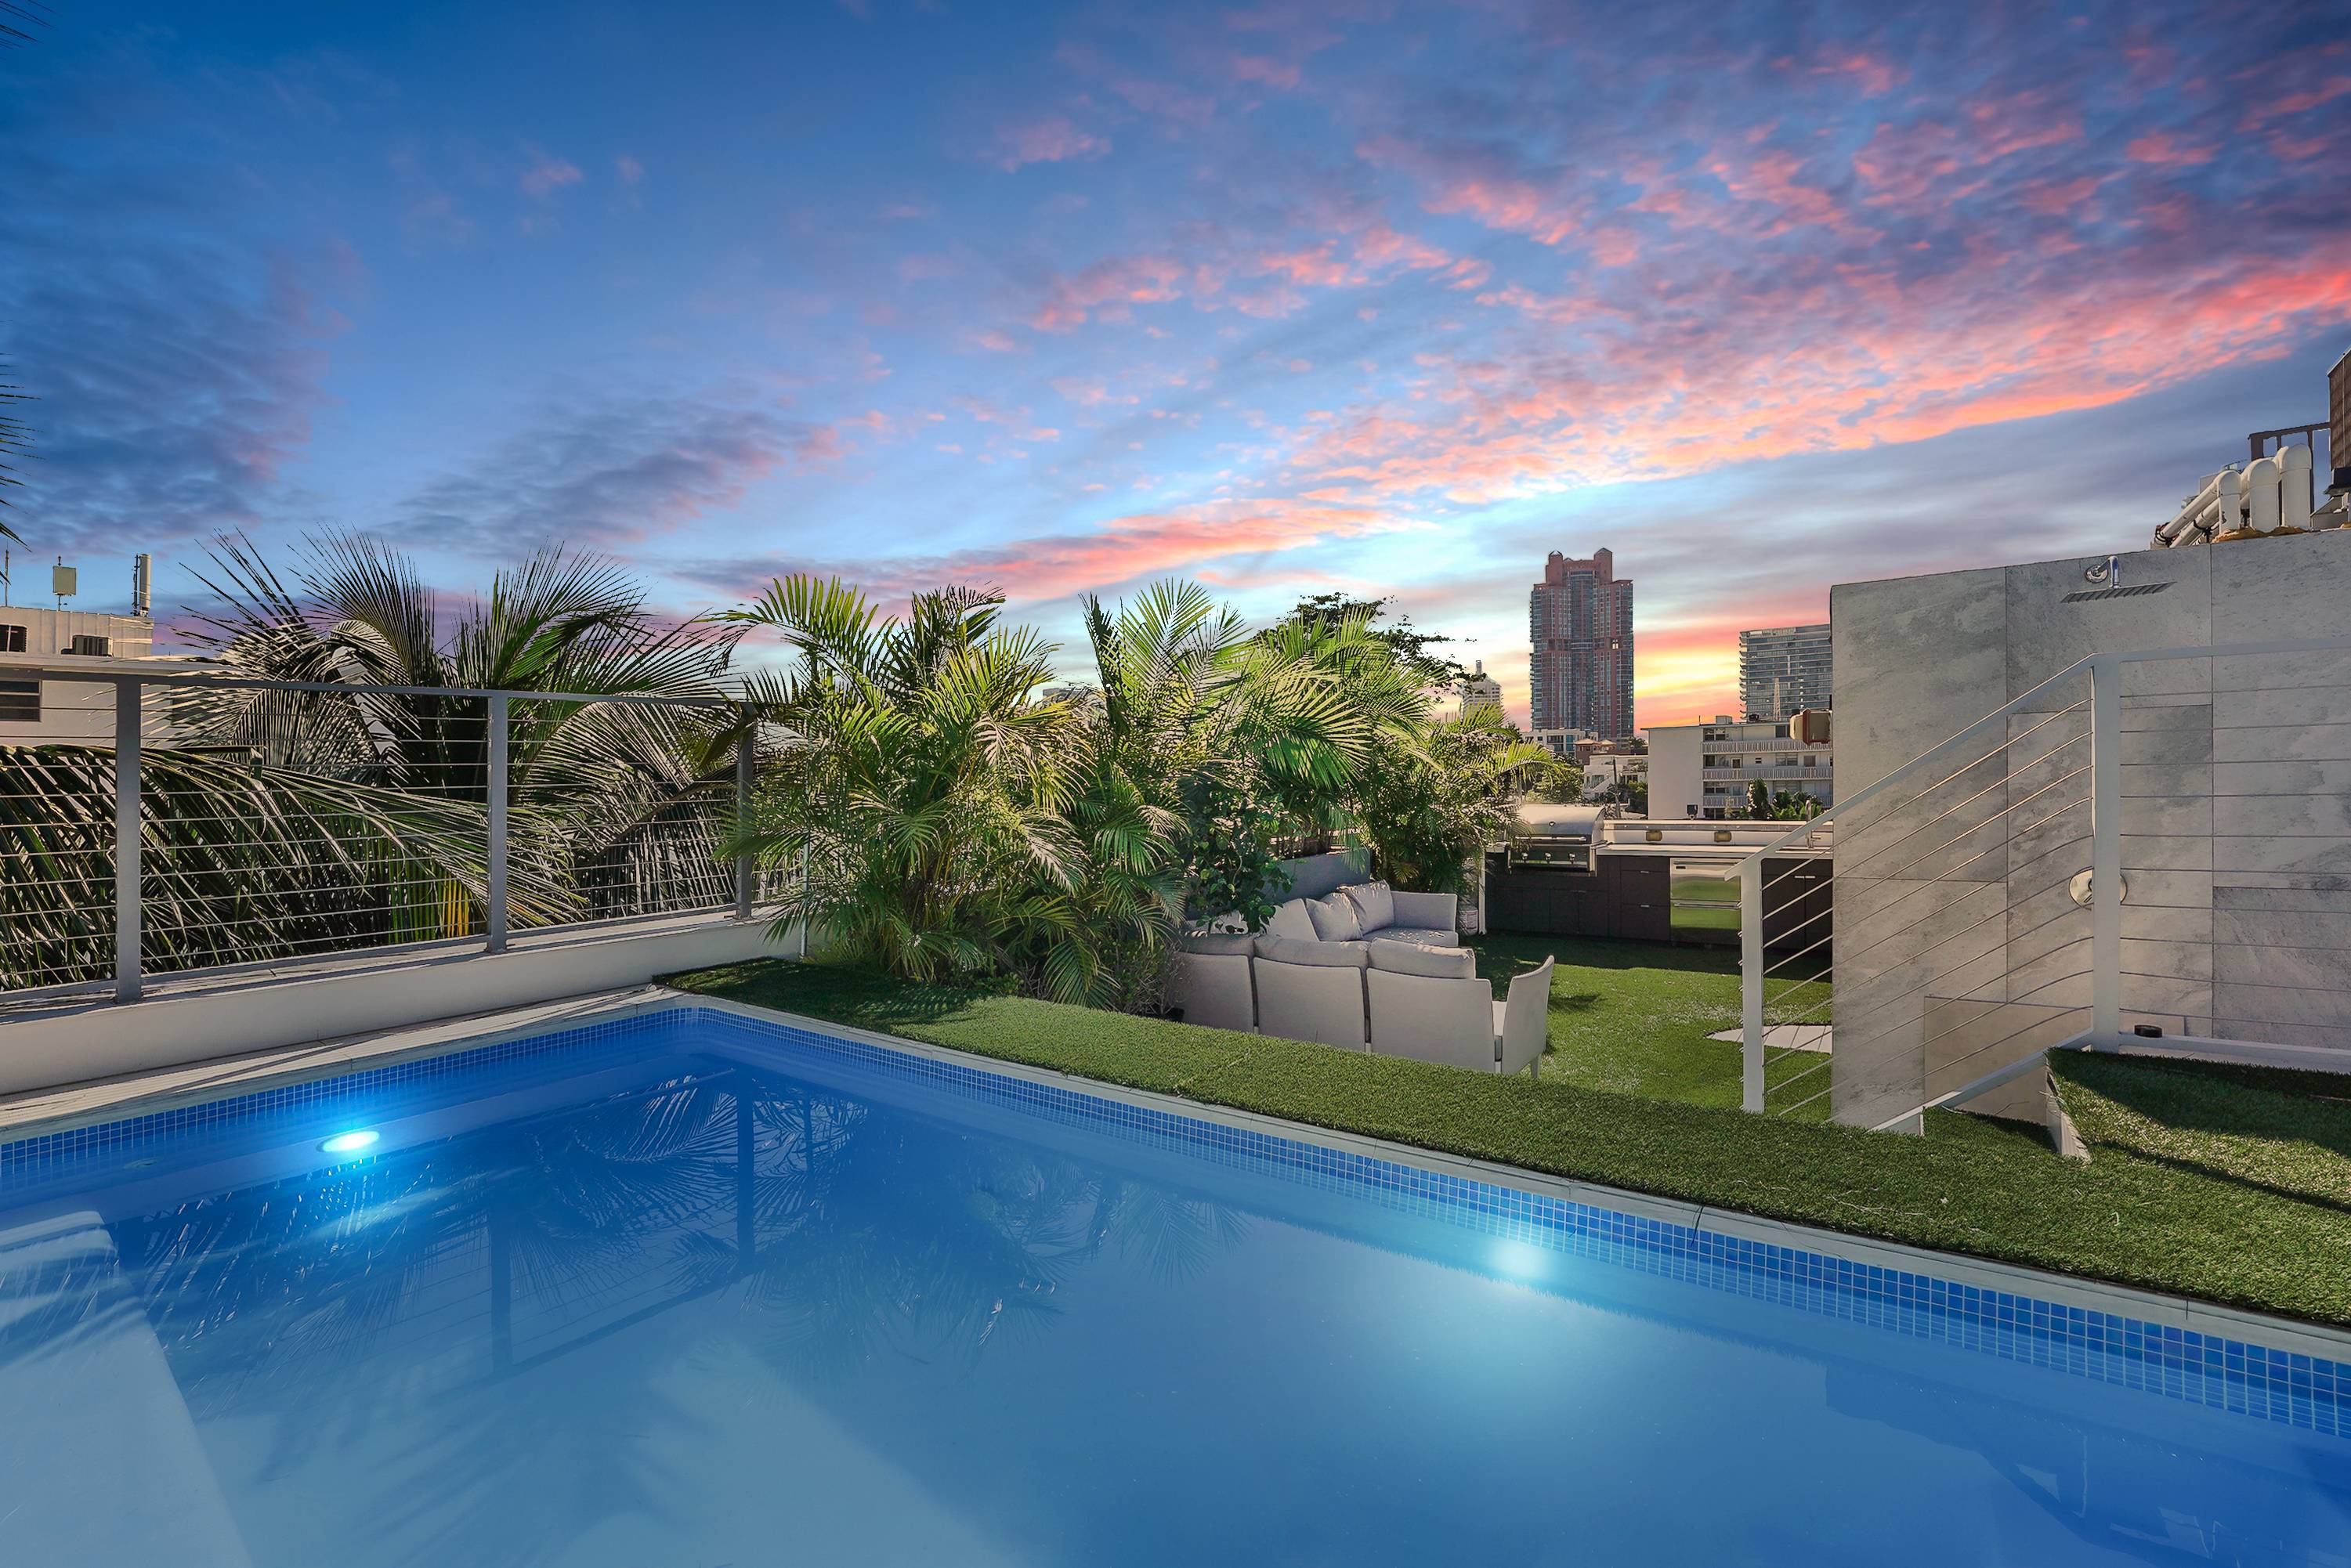 Miami Beach | House for sale |2 bed | 2.5 bath, Garage |Pool, Rooftop, Outdoor Kitchen